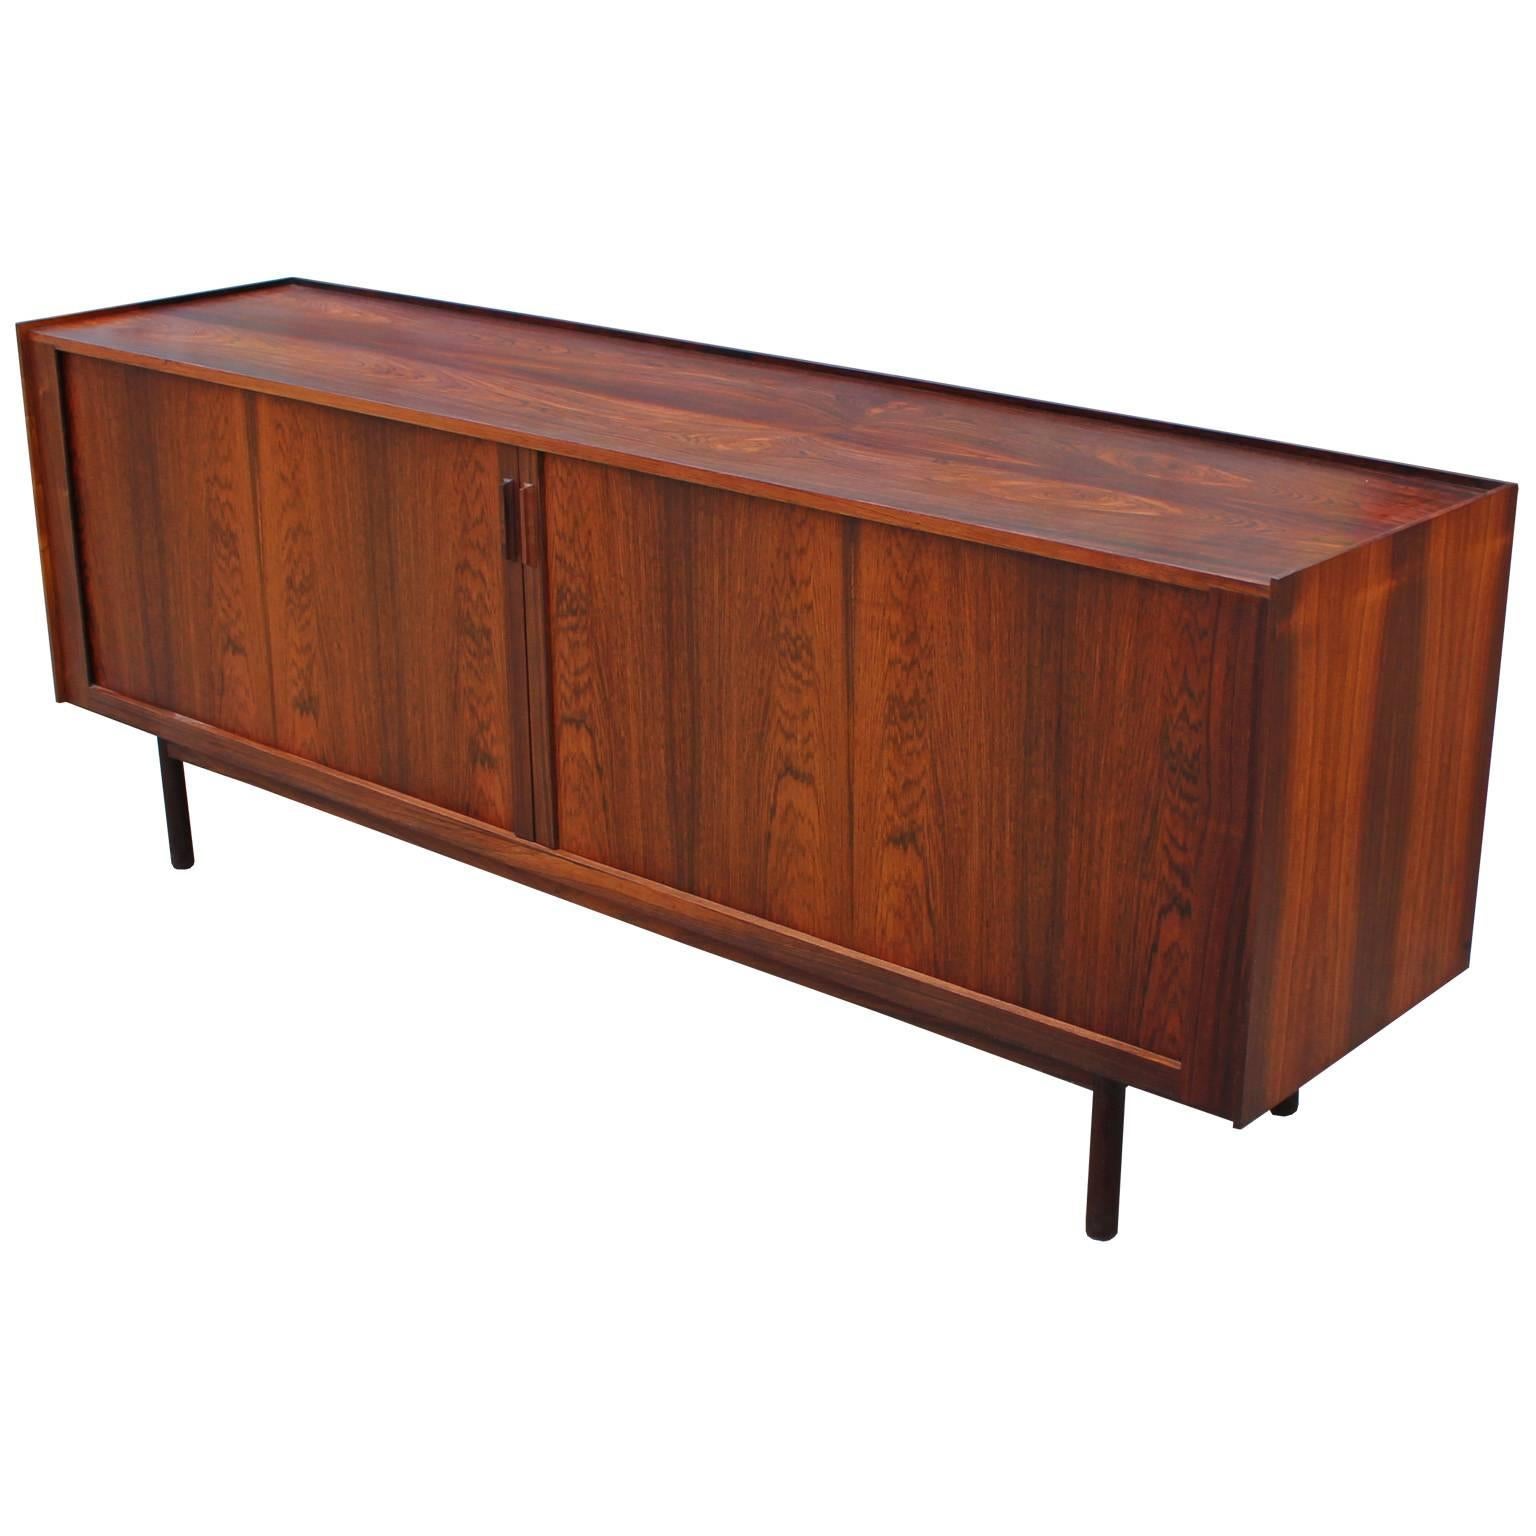 Wonderful Ib Kofod-Larsen tambour door rosewood sideboard or credenza from Denmark. The simple design along with excellent quality makes this sideboard a true masterpiece. The matched Brazilian rosewood will turn heads in any room. In great vintage